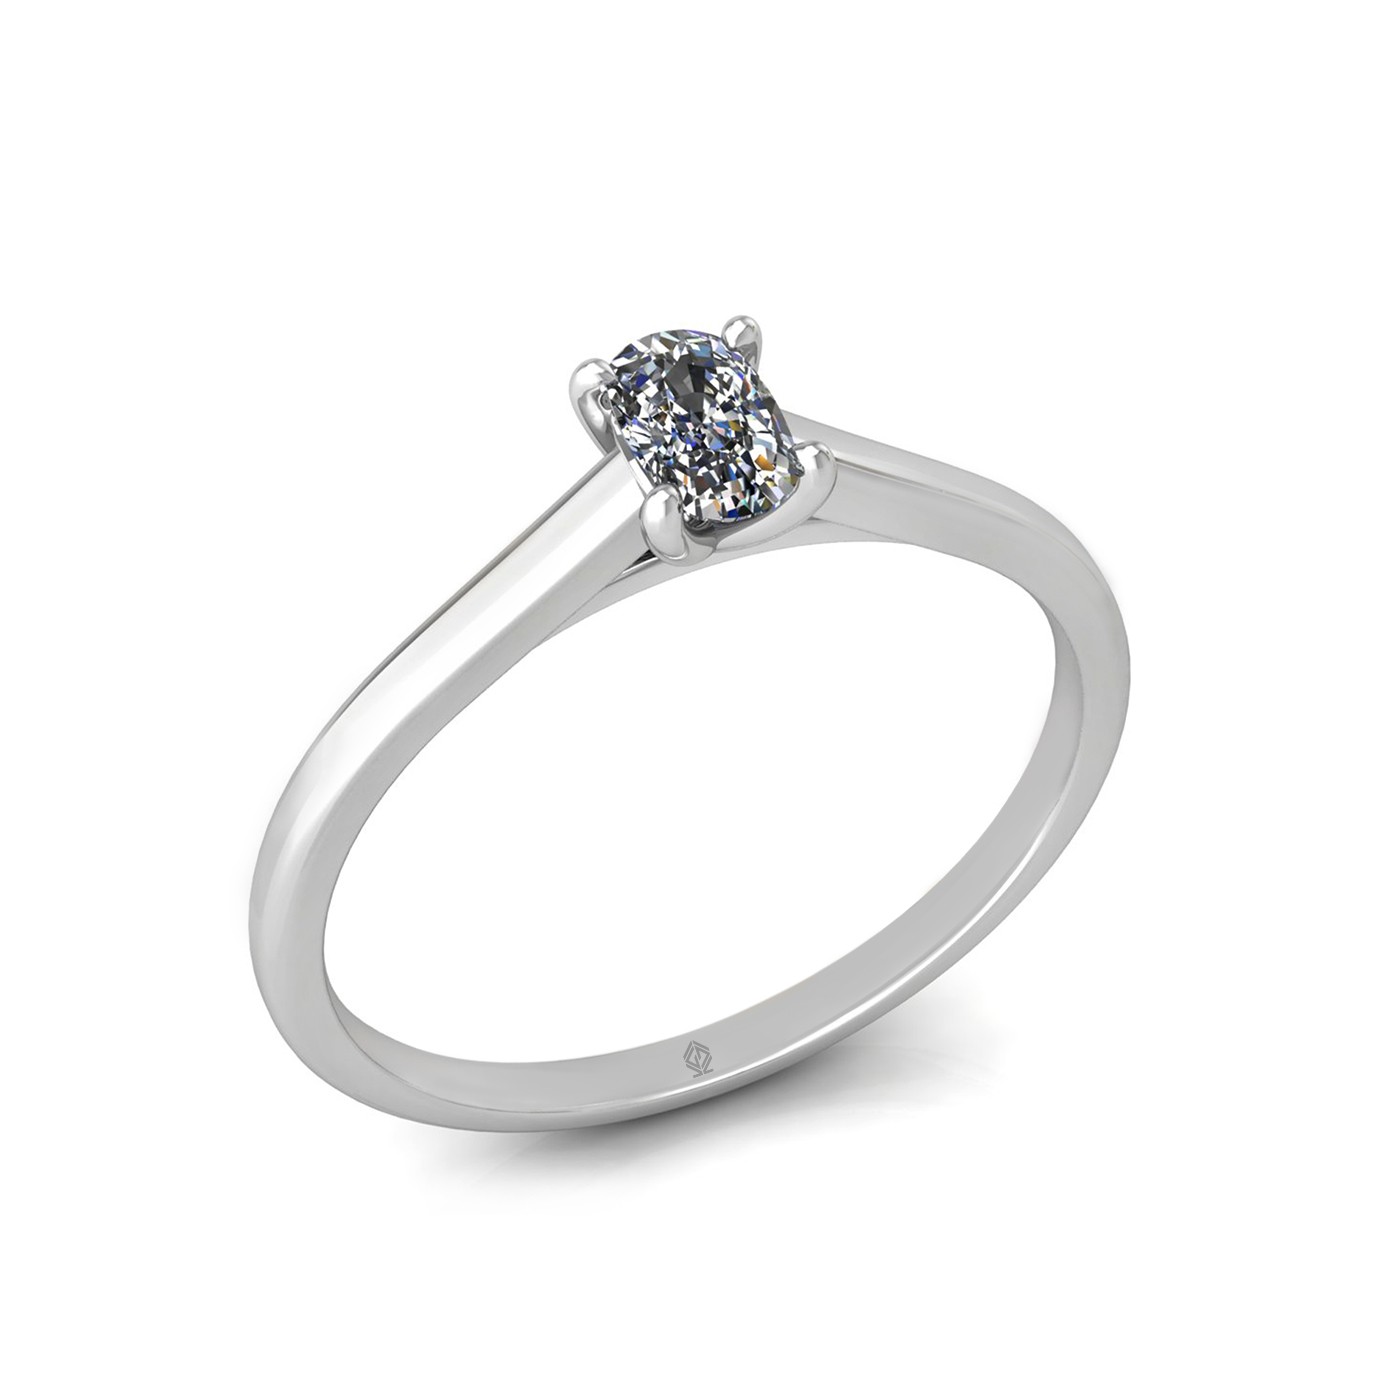 18k white gold  0,30 ct 4 prongs solitaire elongated cushion cut diamond engagement ring with whisper thin band